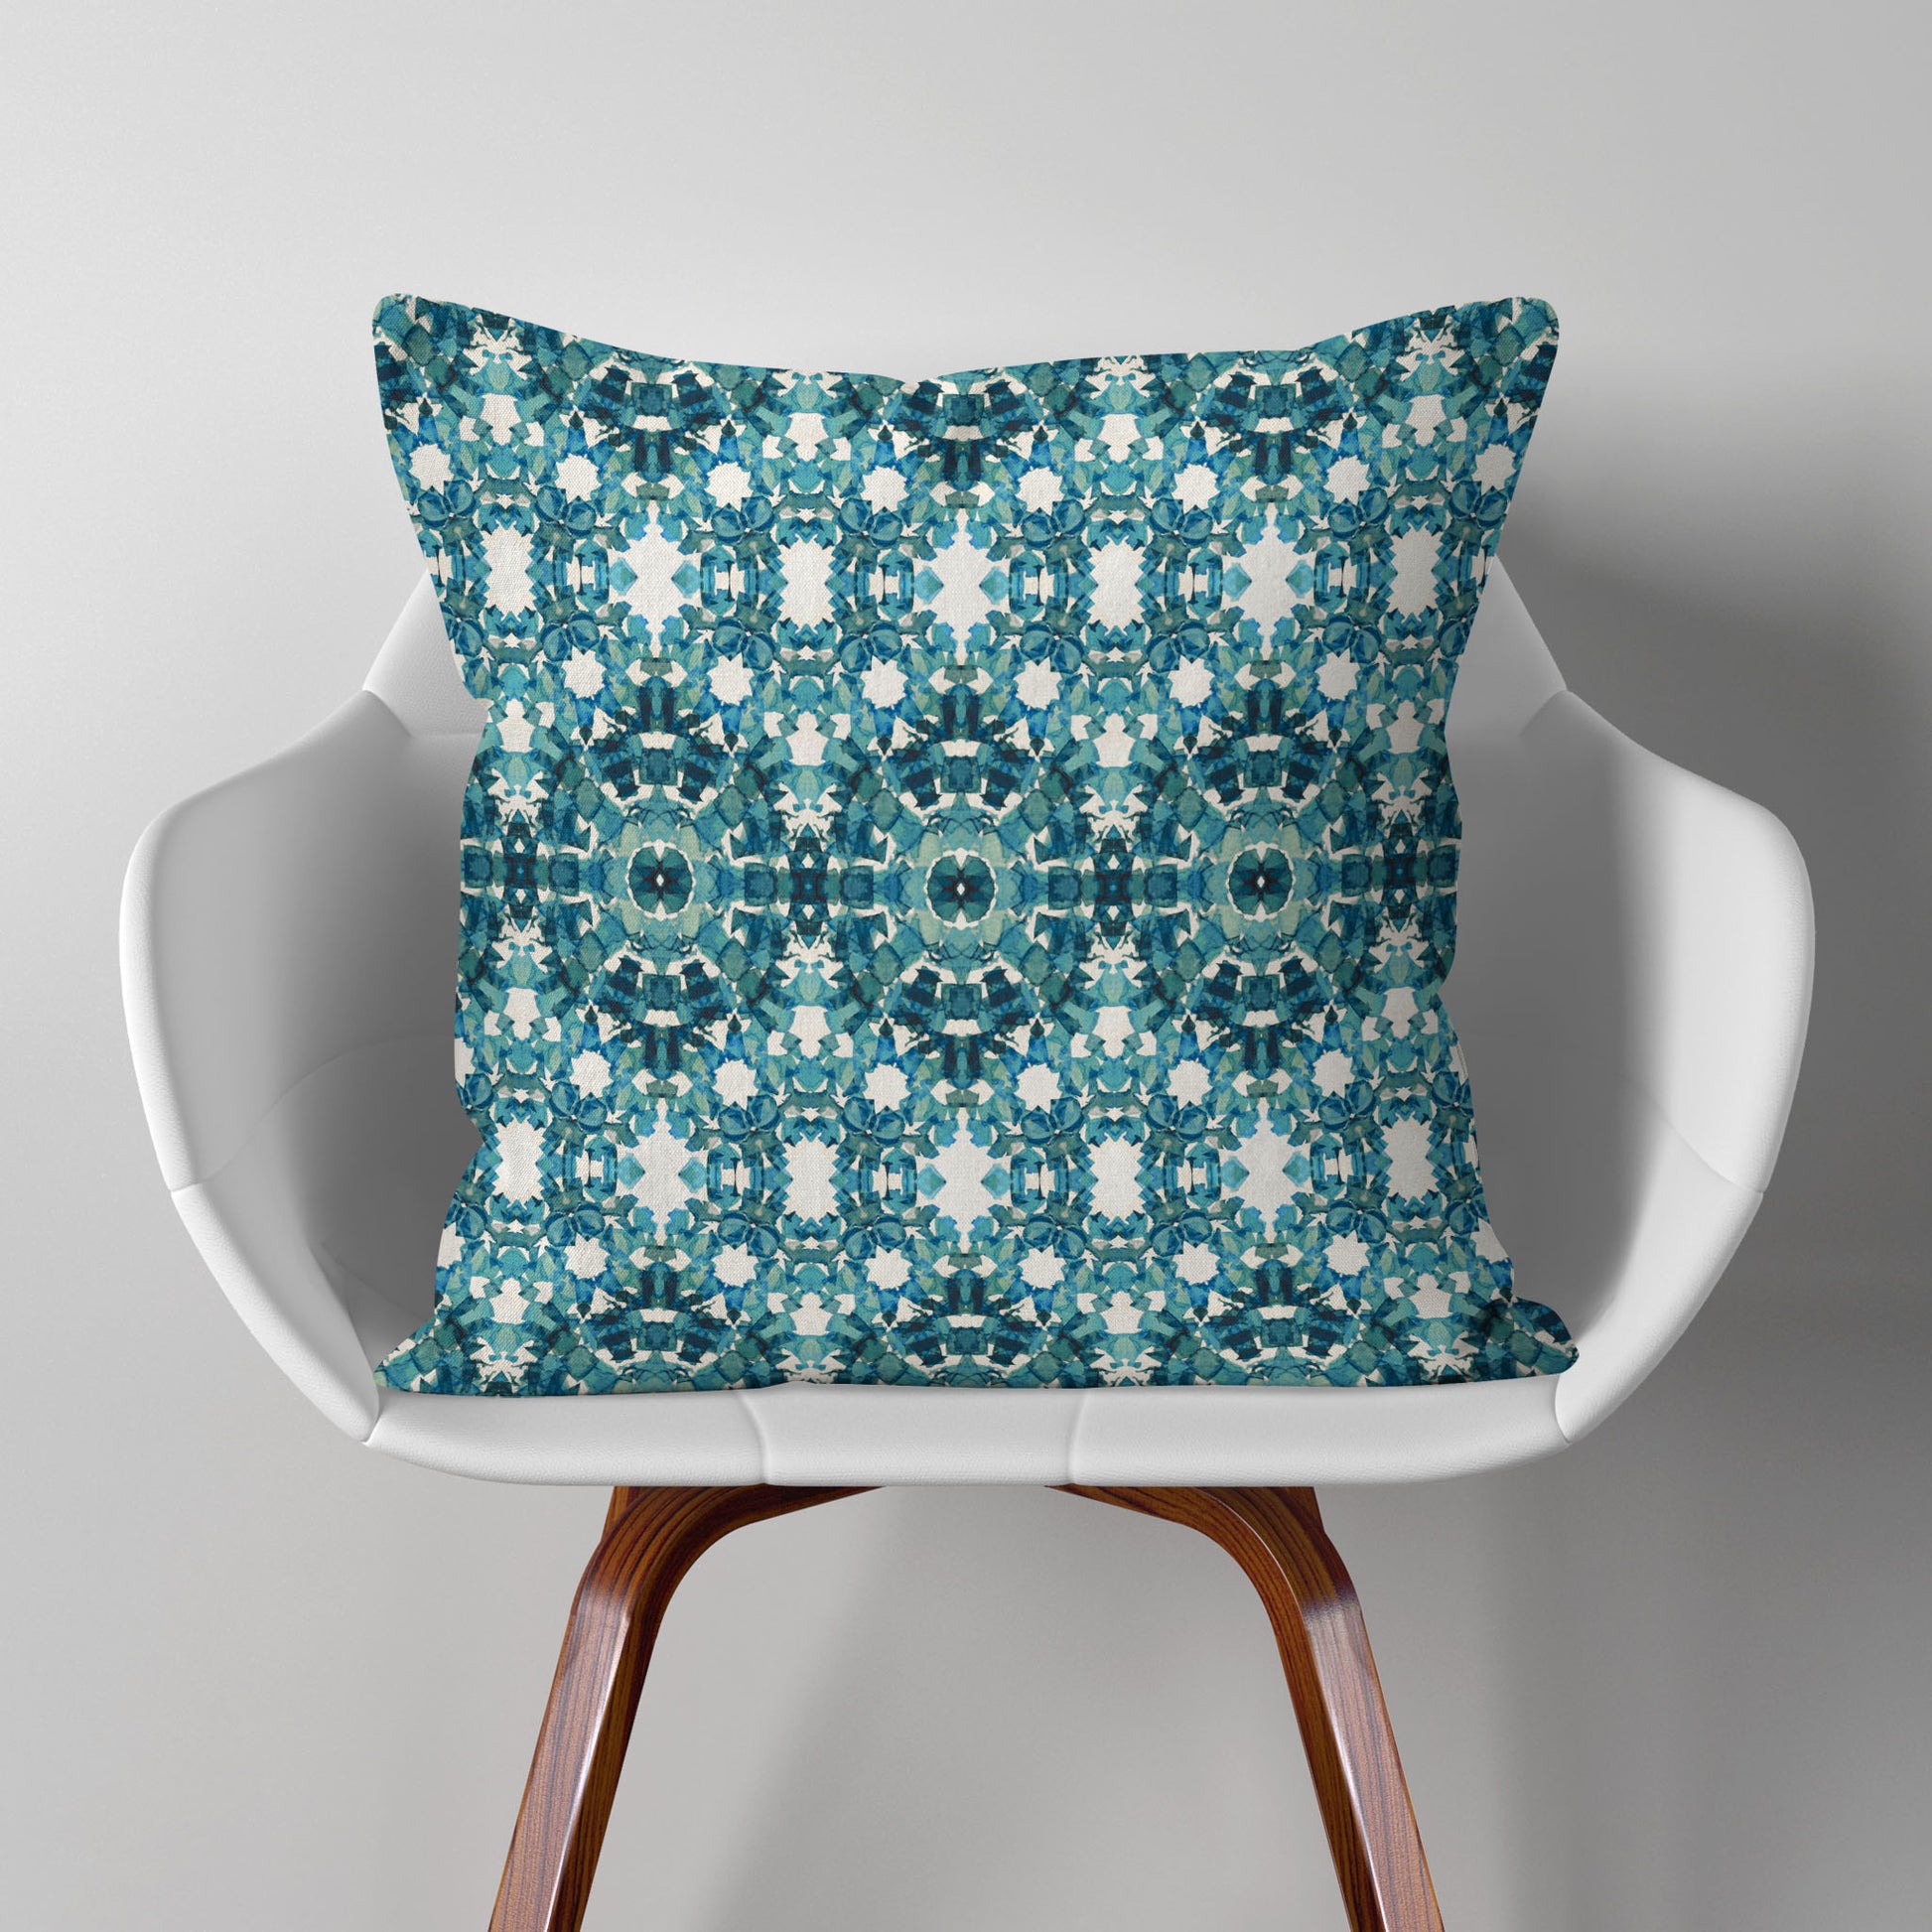 Square throw pillow featuring an abstract teal pattern, sitting on a modern white chair